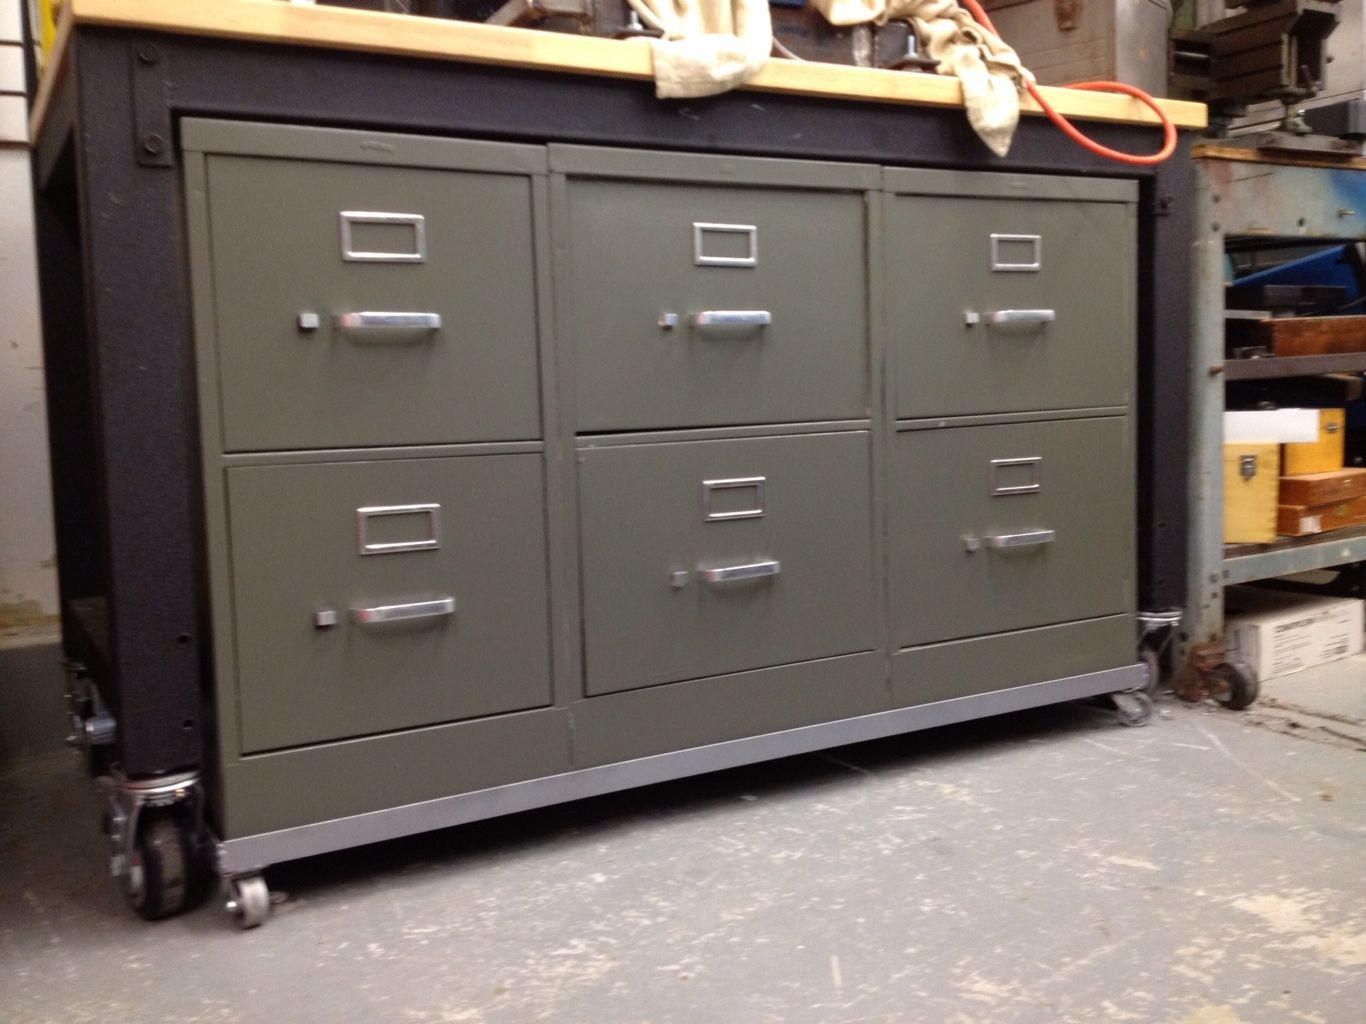 Storage Bench Filing Cabinet
 Filing Cabinets modified into tool cabinet rolling work